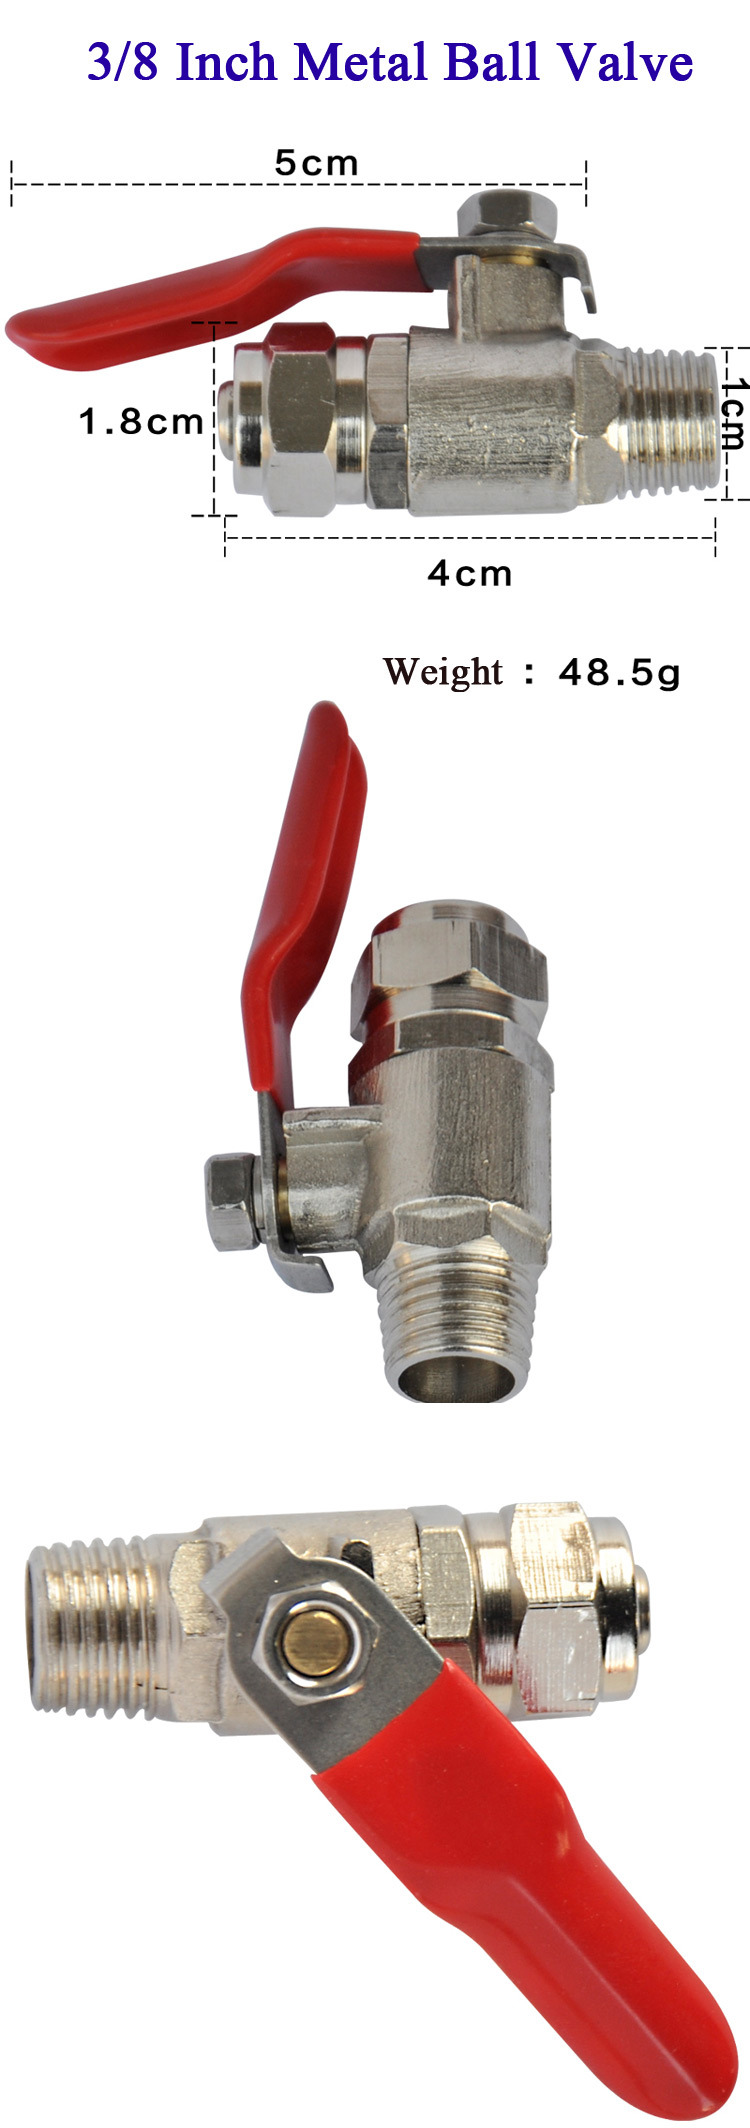 3/8 Inch Metal Ball Valve Fittings of Water Purifiers